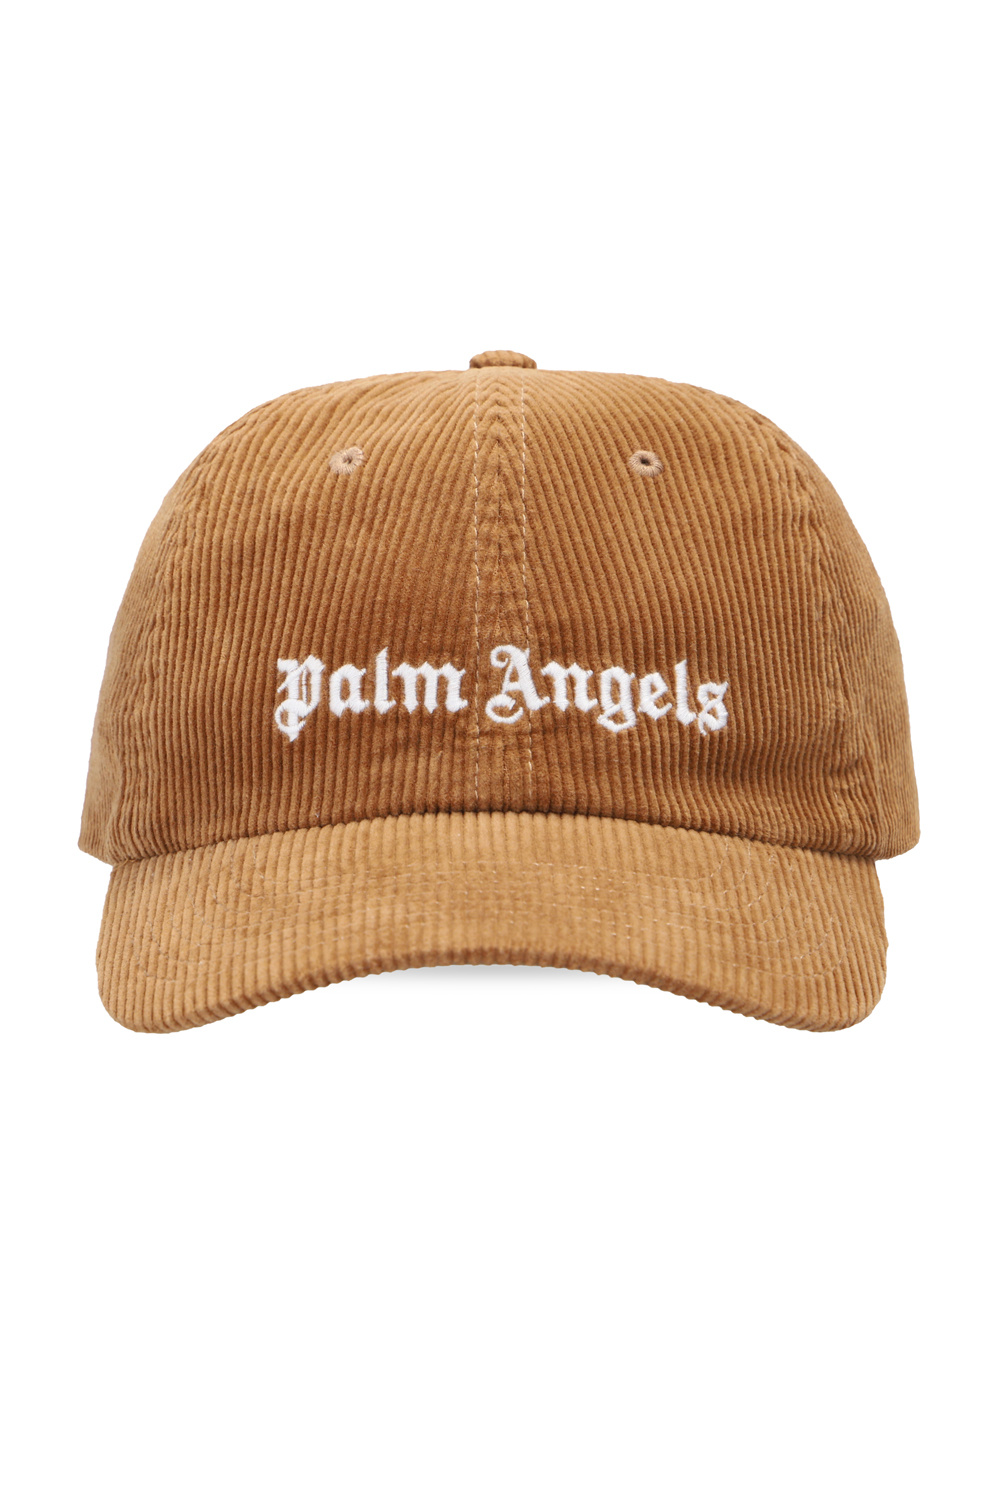 Palm Angels Baseball cap with logo, Men's Accessories